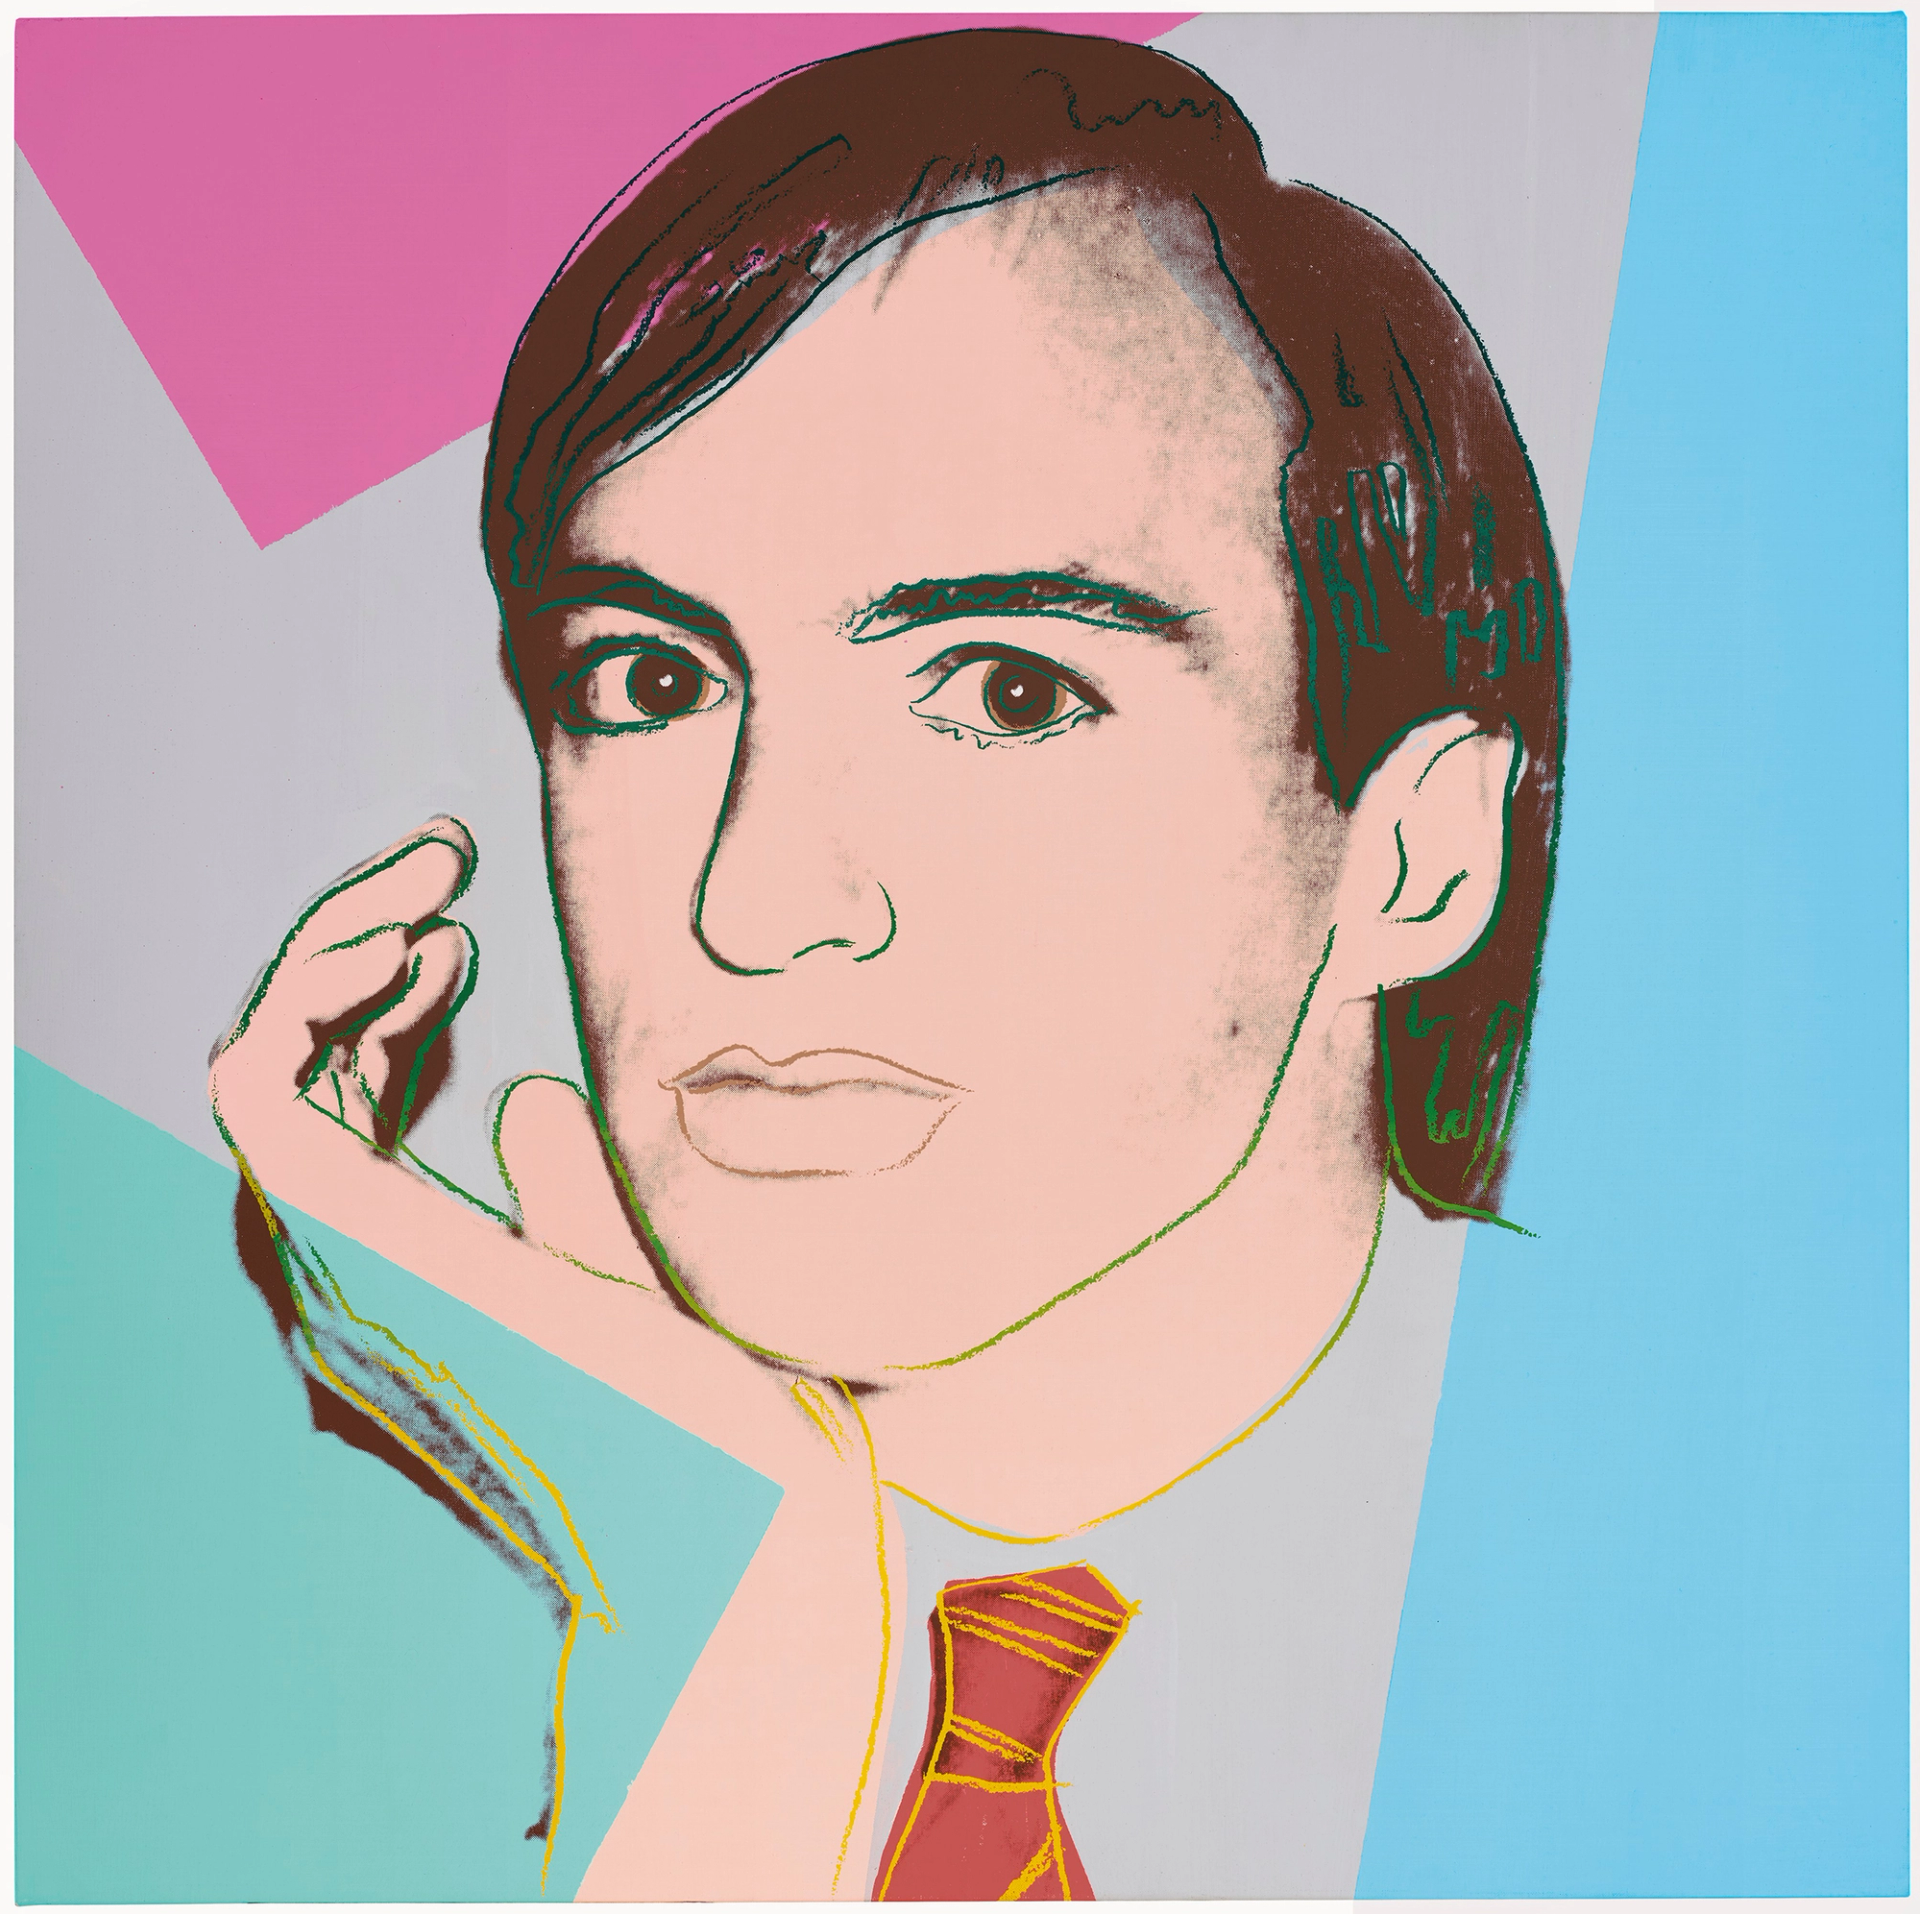 A Pop Art style portrait of executive Jon Gould, done by Andy Warhol. Gould is shown in bright colours, while wearing a tie.